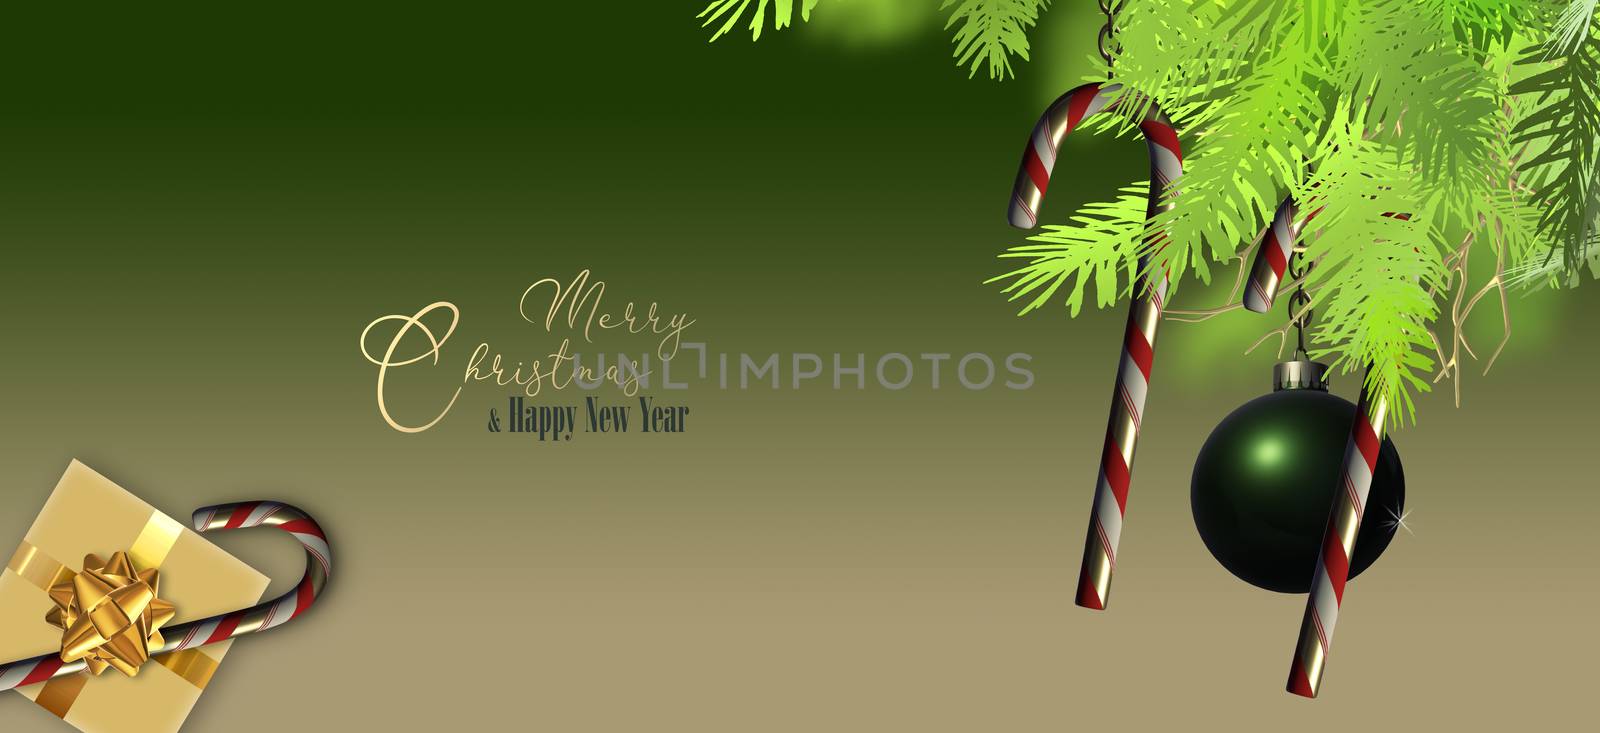 Green holiday Christmas background by NelliPolk